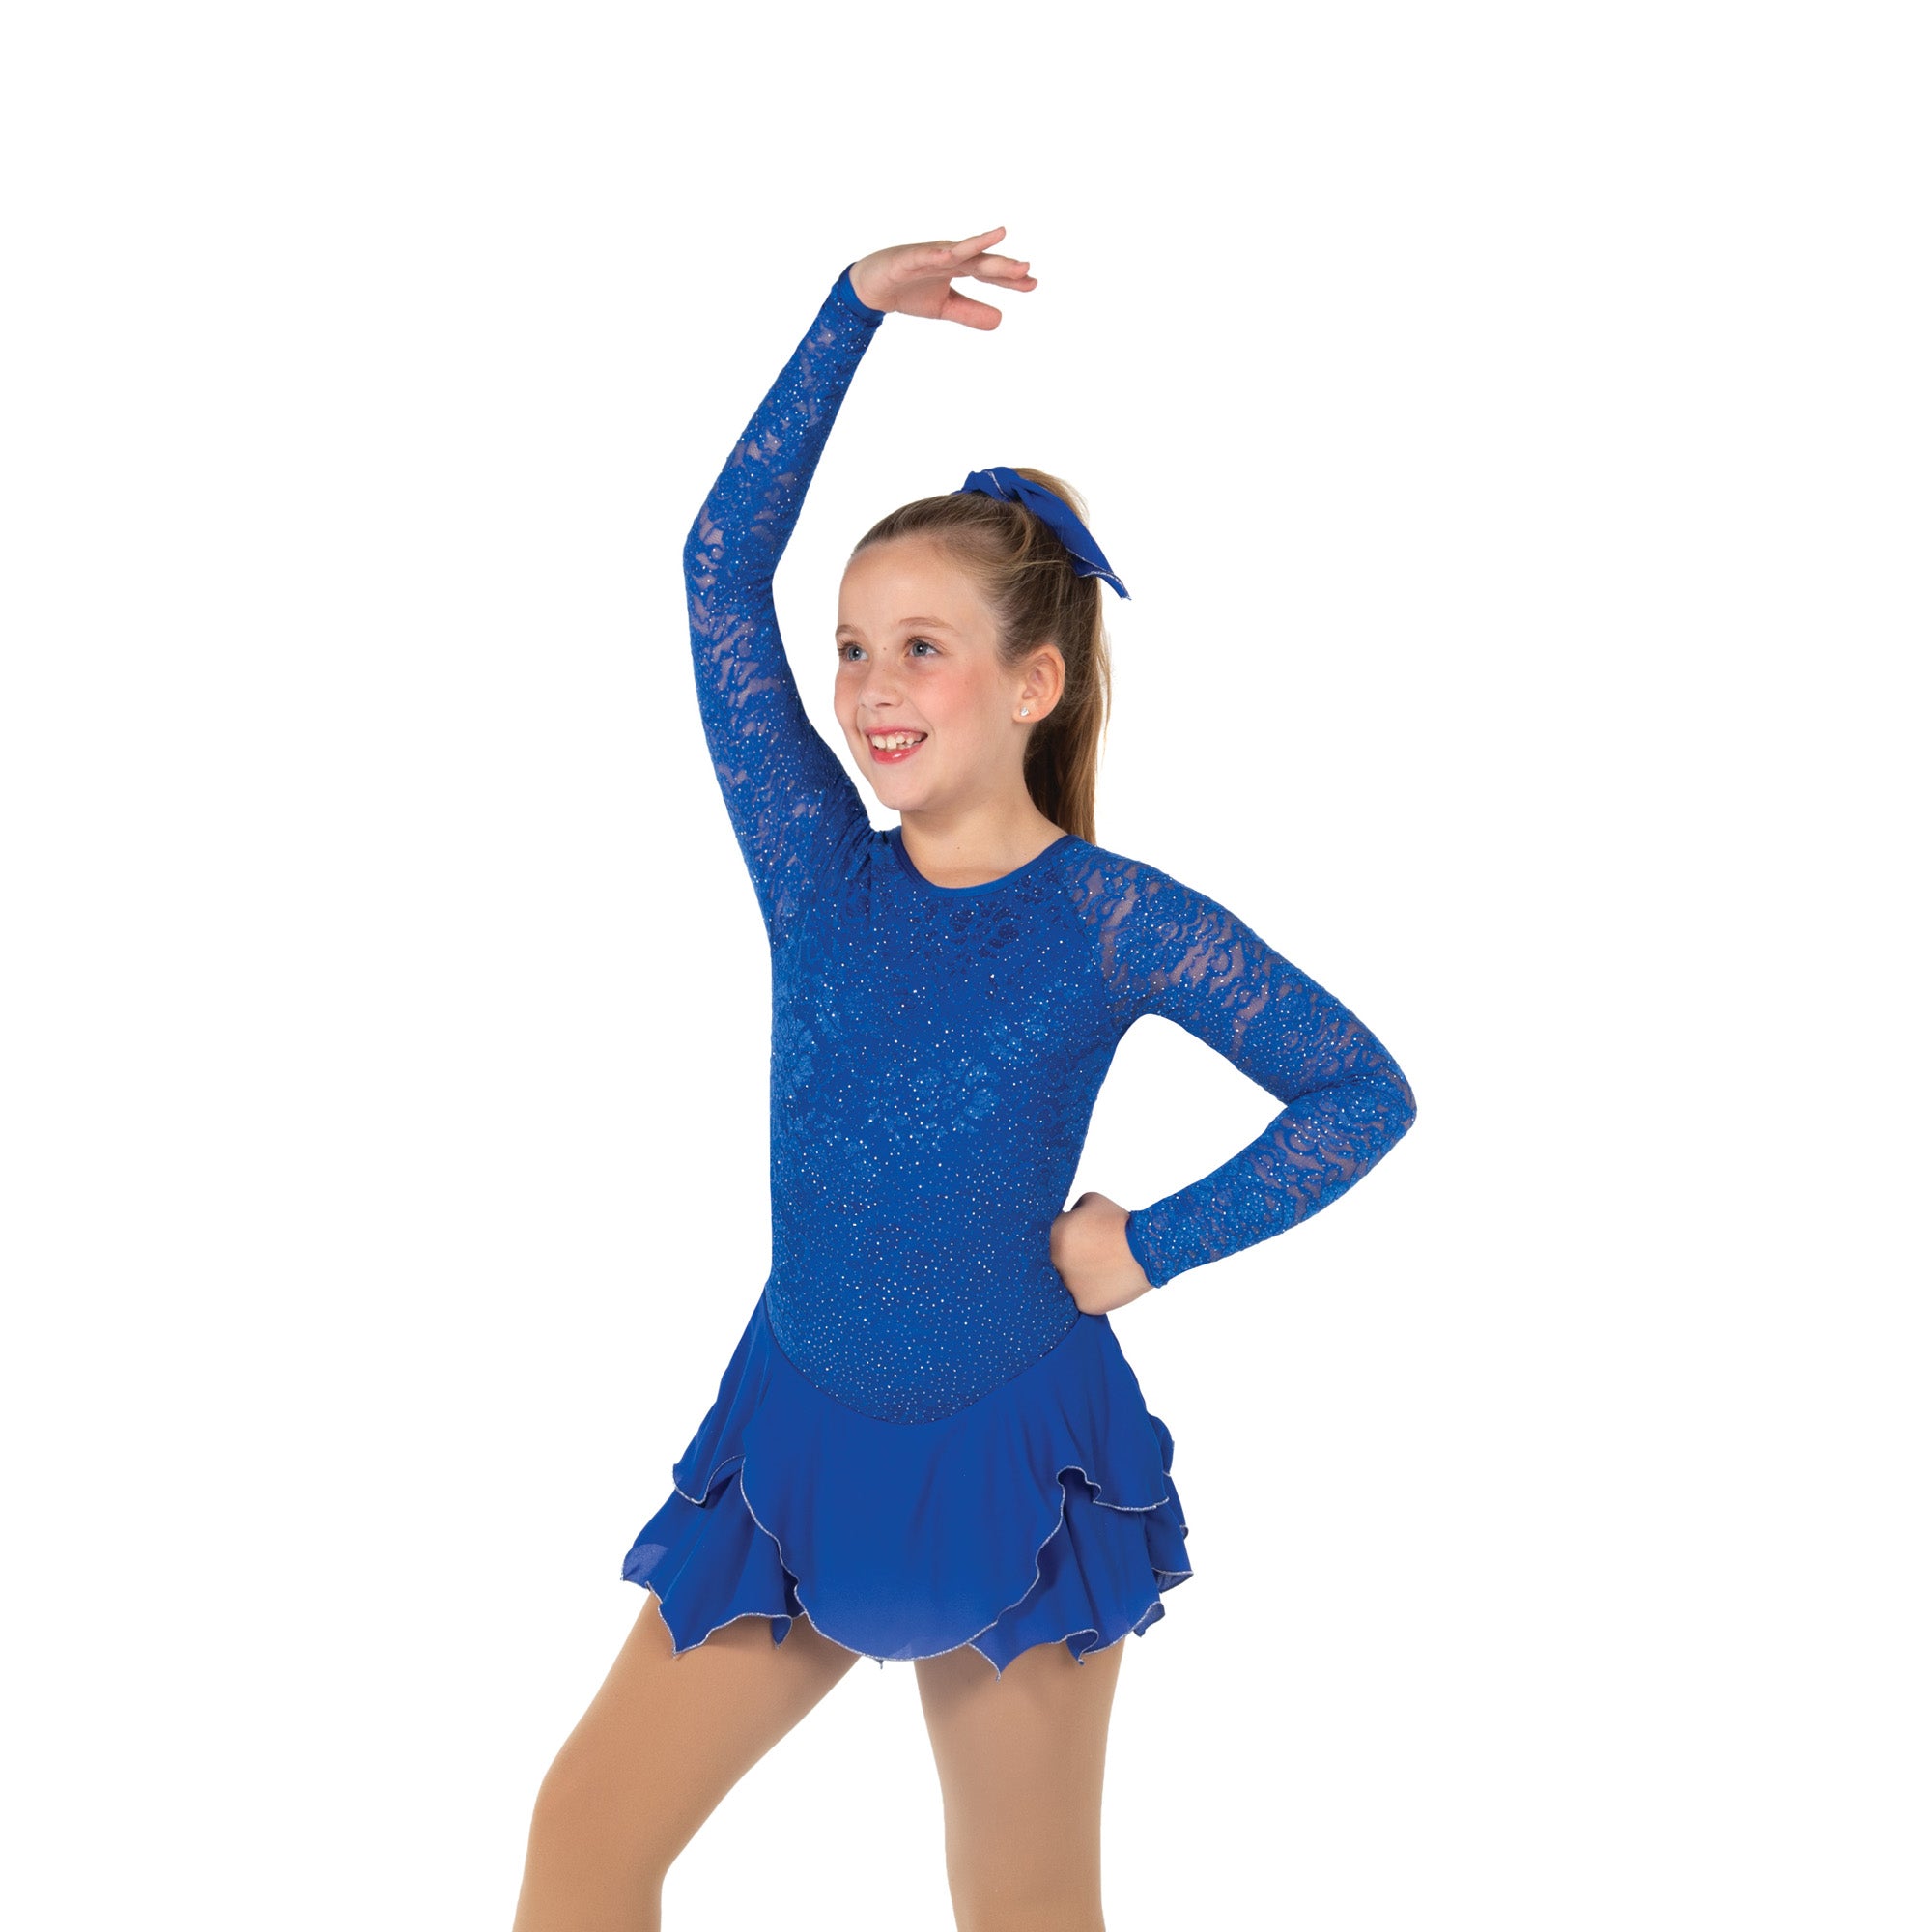 142 Tulip Lace Skating Dress in Royal Blue by Jerry's